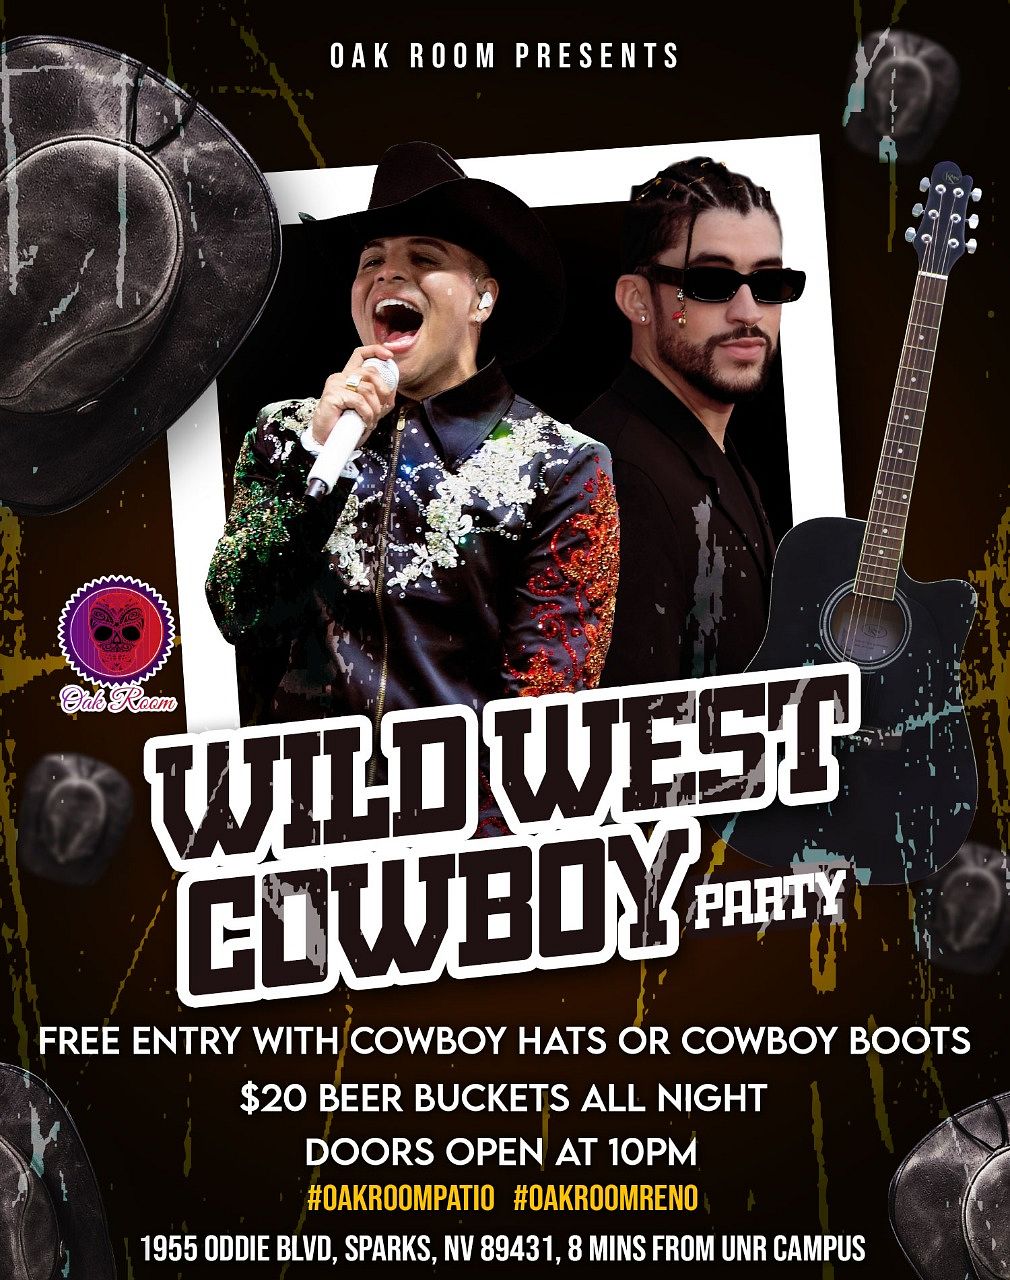 Wild West Cowboy Tickets at Oak Room Lounge in Sparks by Oakroom Lounge